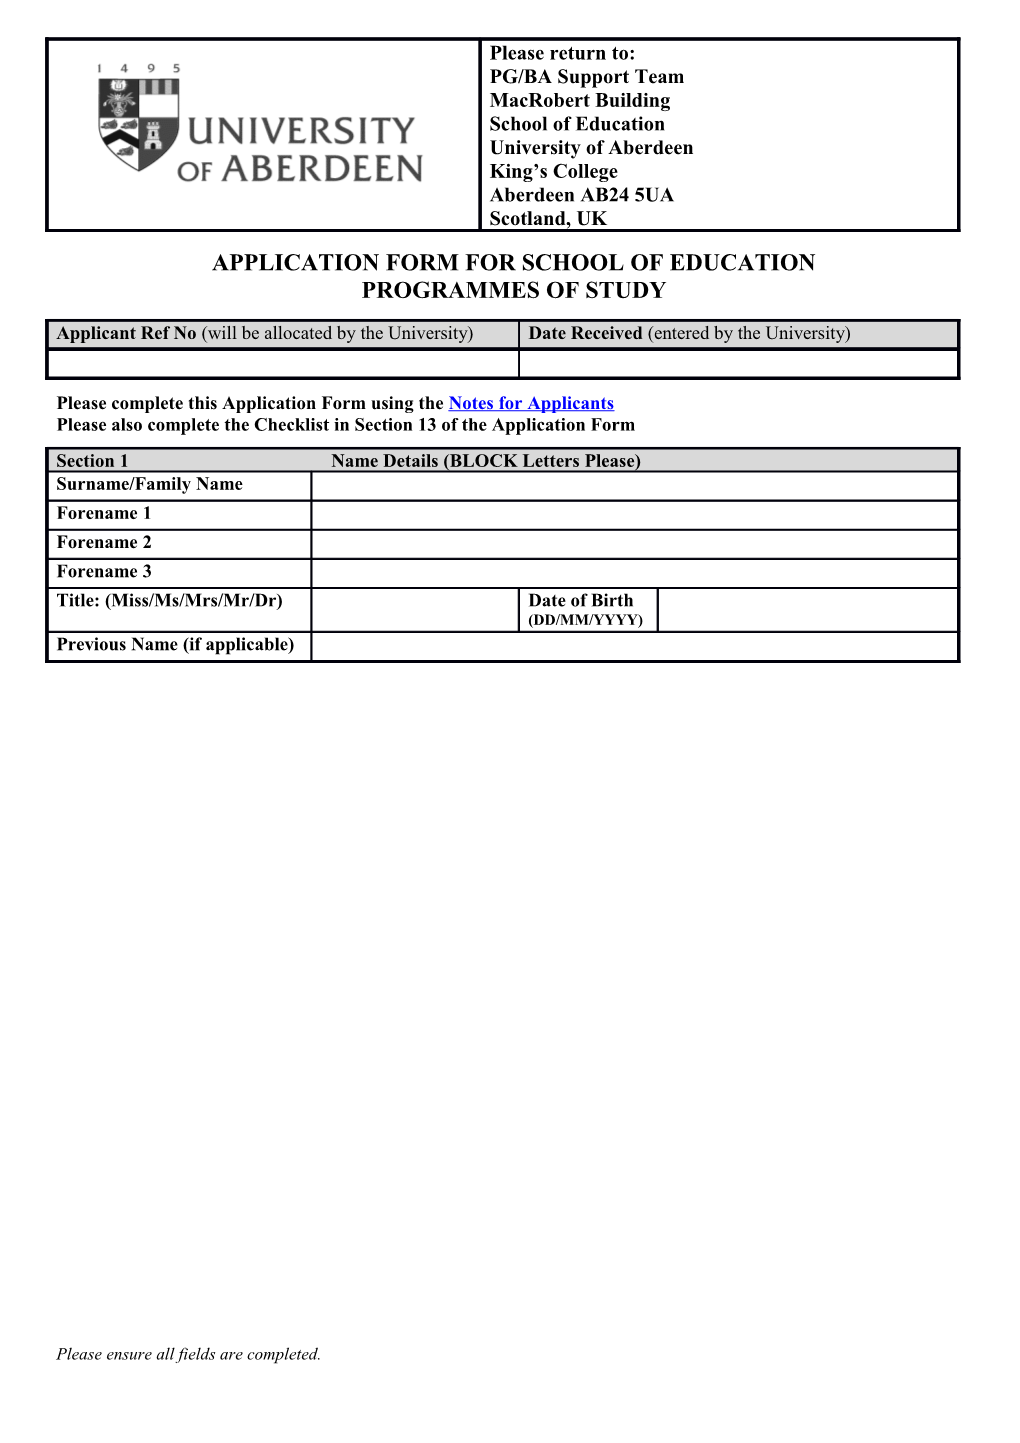 Application Form for School of Education